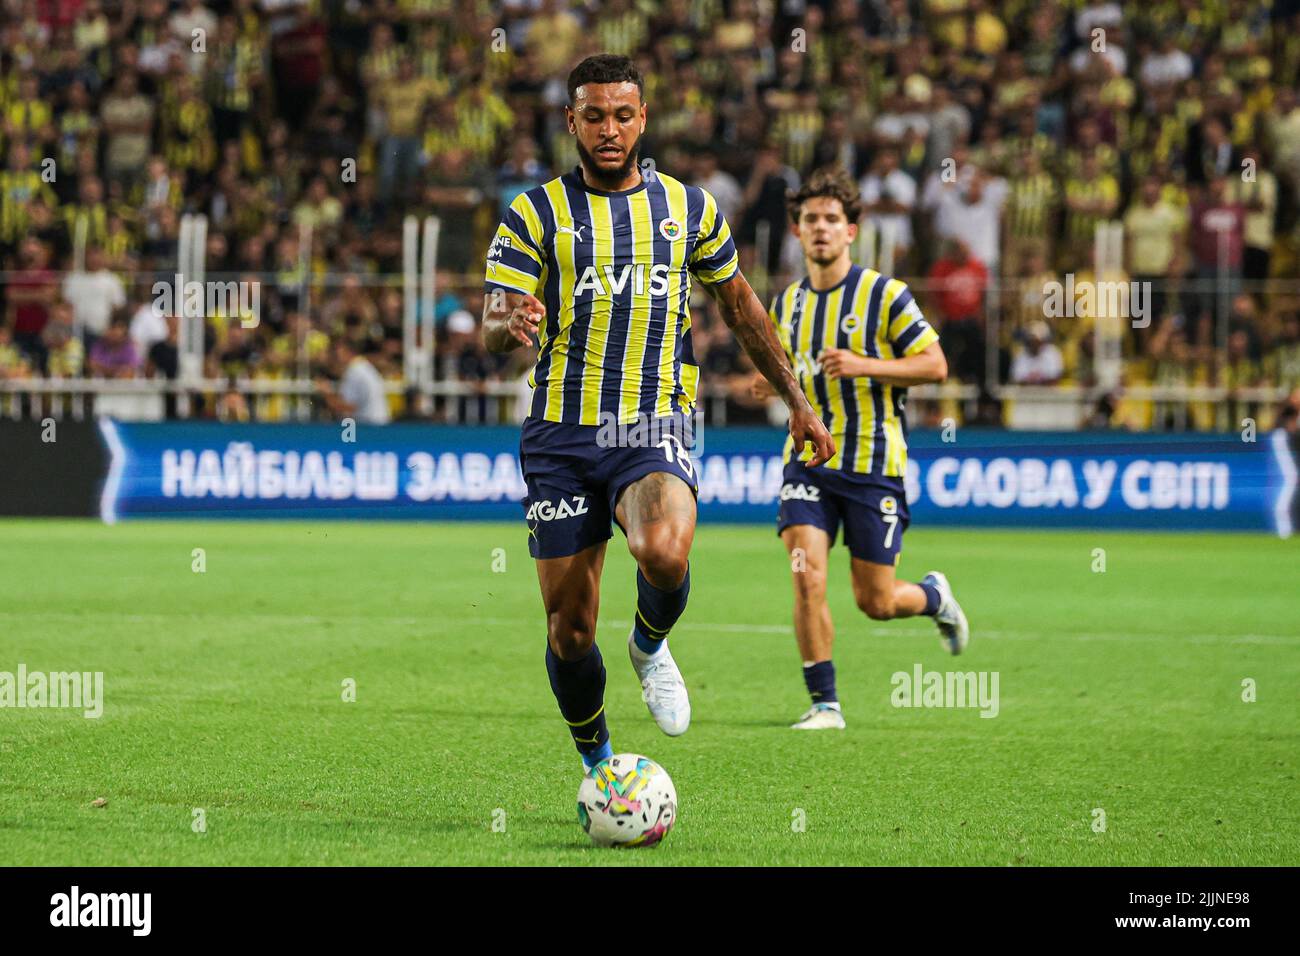 ISTANBUL, TURKEY - JULY 27: Joshua King of Fenerbahce during the Champions League Qualification match between Fenerbahce and Dinamo Kiev at Sukru Saracoglu Stadium on July 27, 2022 in Istanbul, Turkey (Photo by Orange Pictures) Stock Photo